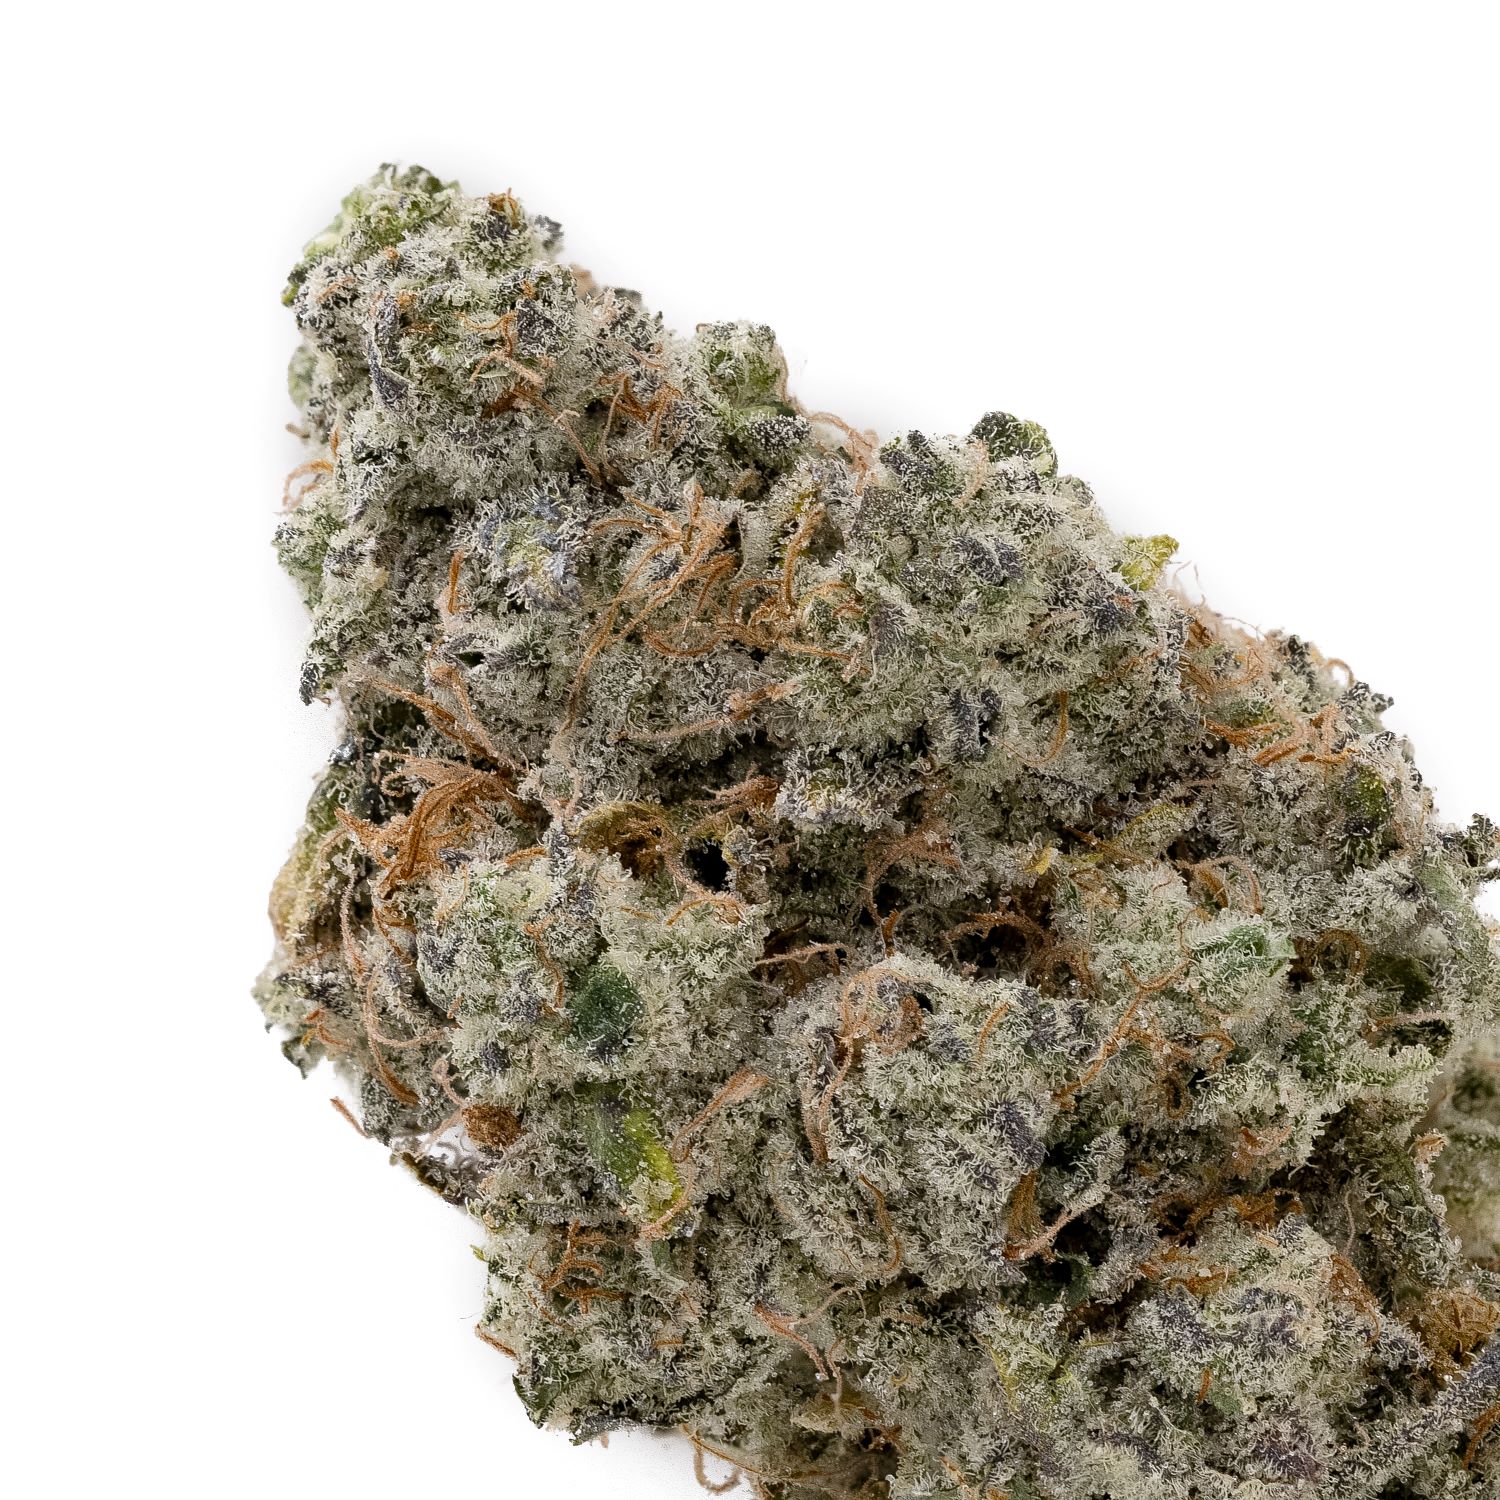 Let’s Explore the Magic of the “Wizard OG Strain”